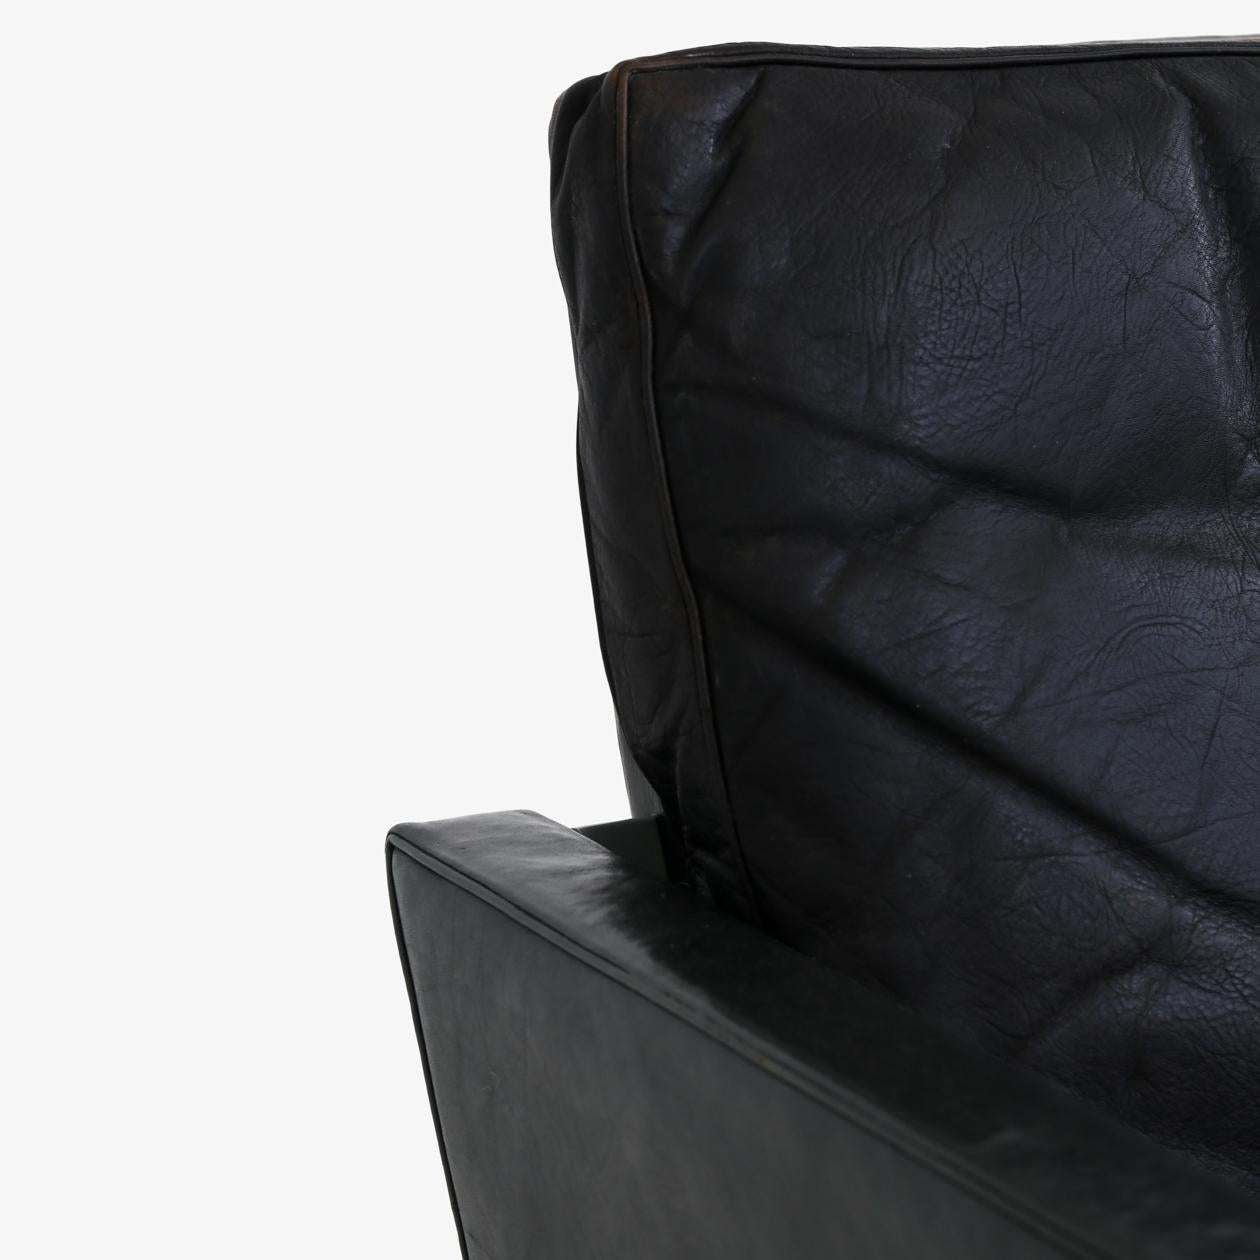 PK 31/2 Sofa in Black Patinated Leather In Good Condition For Sale In Copenhagen, DK